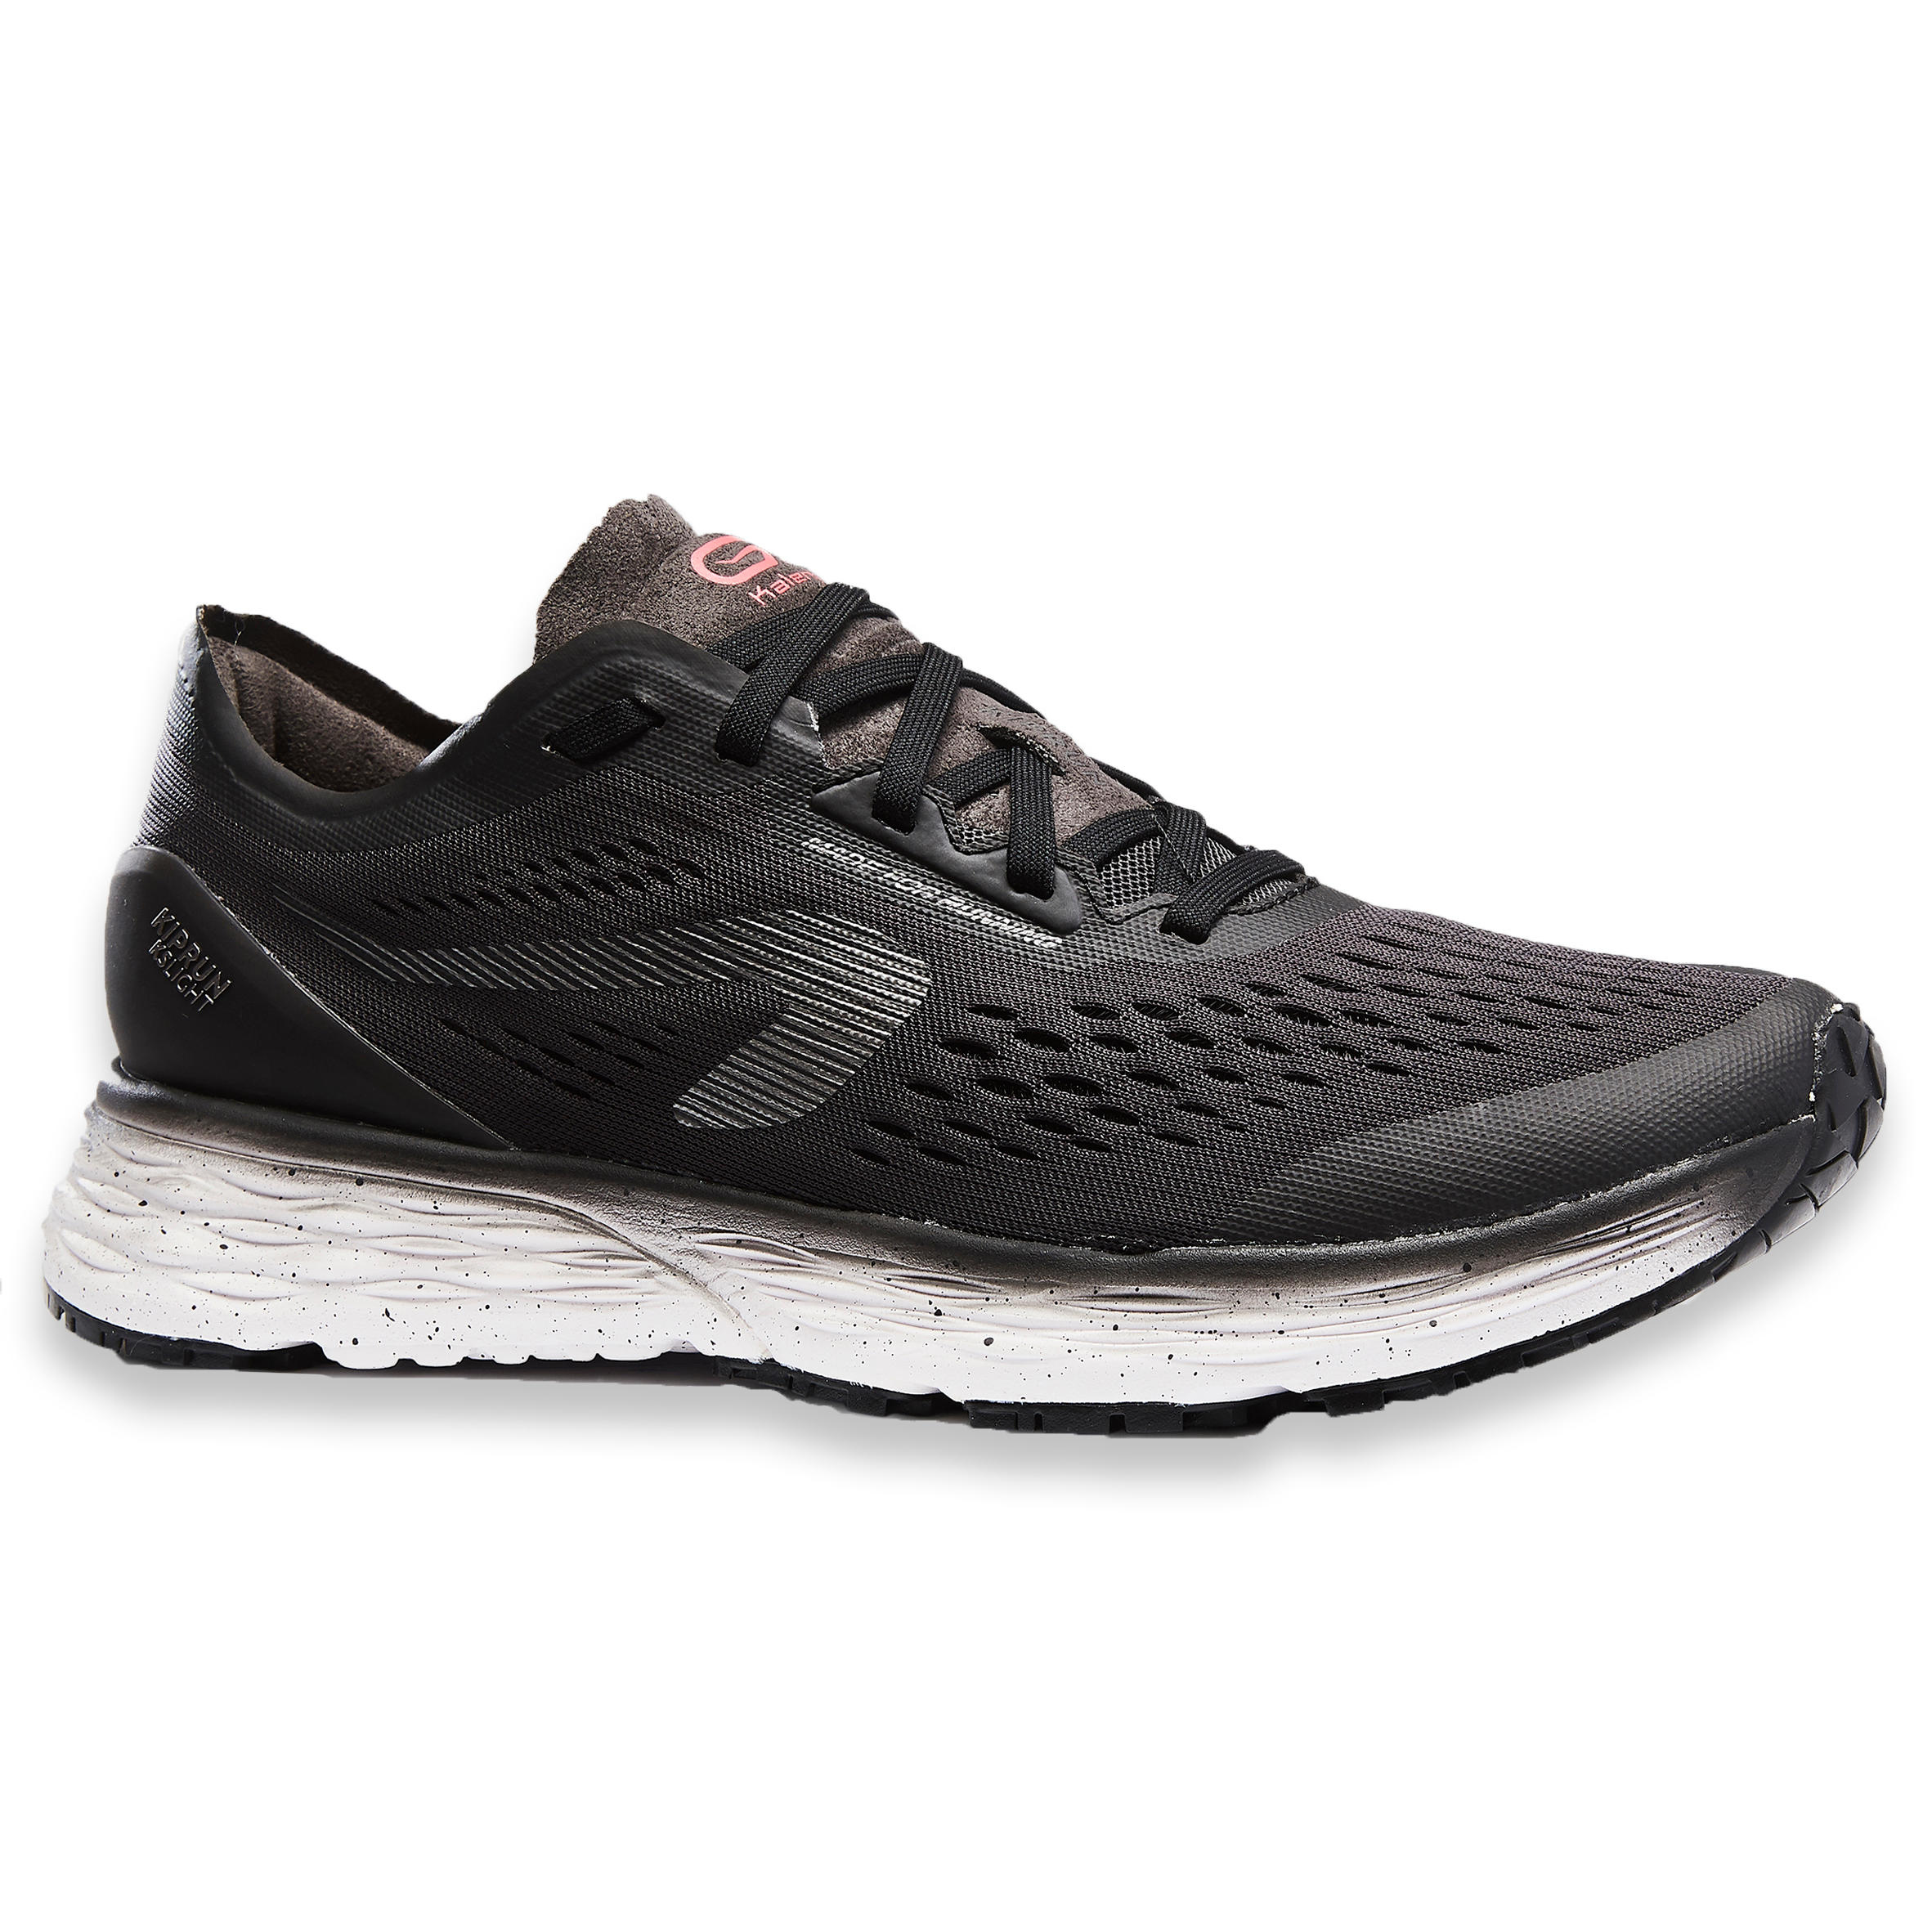 decathlon stability running shoes